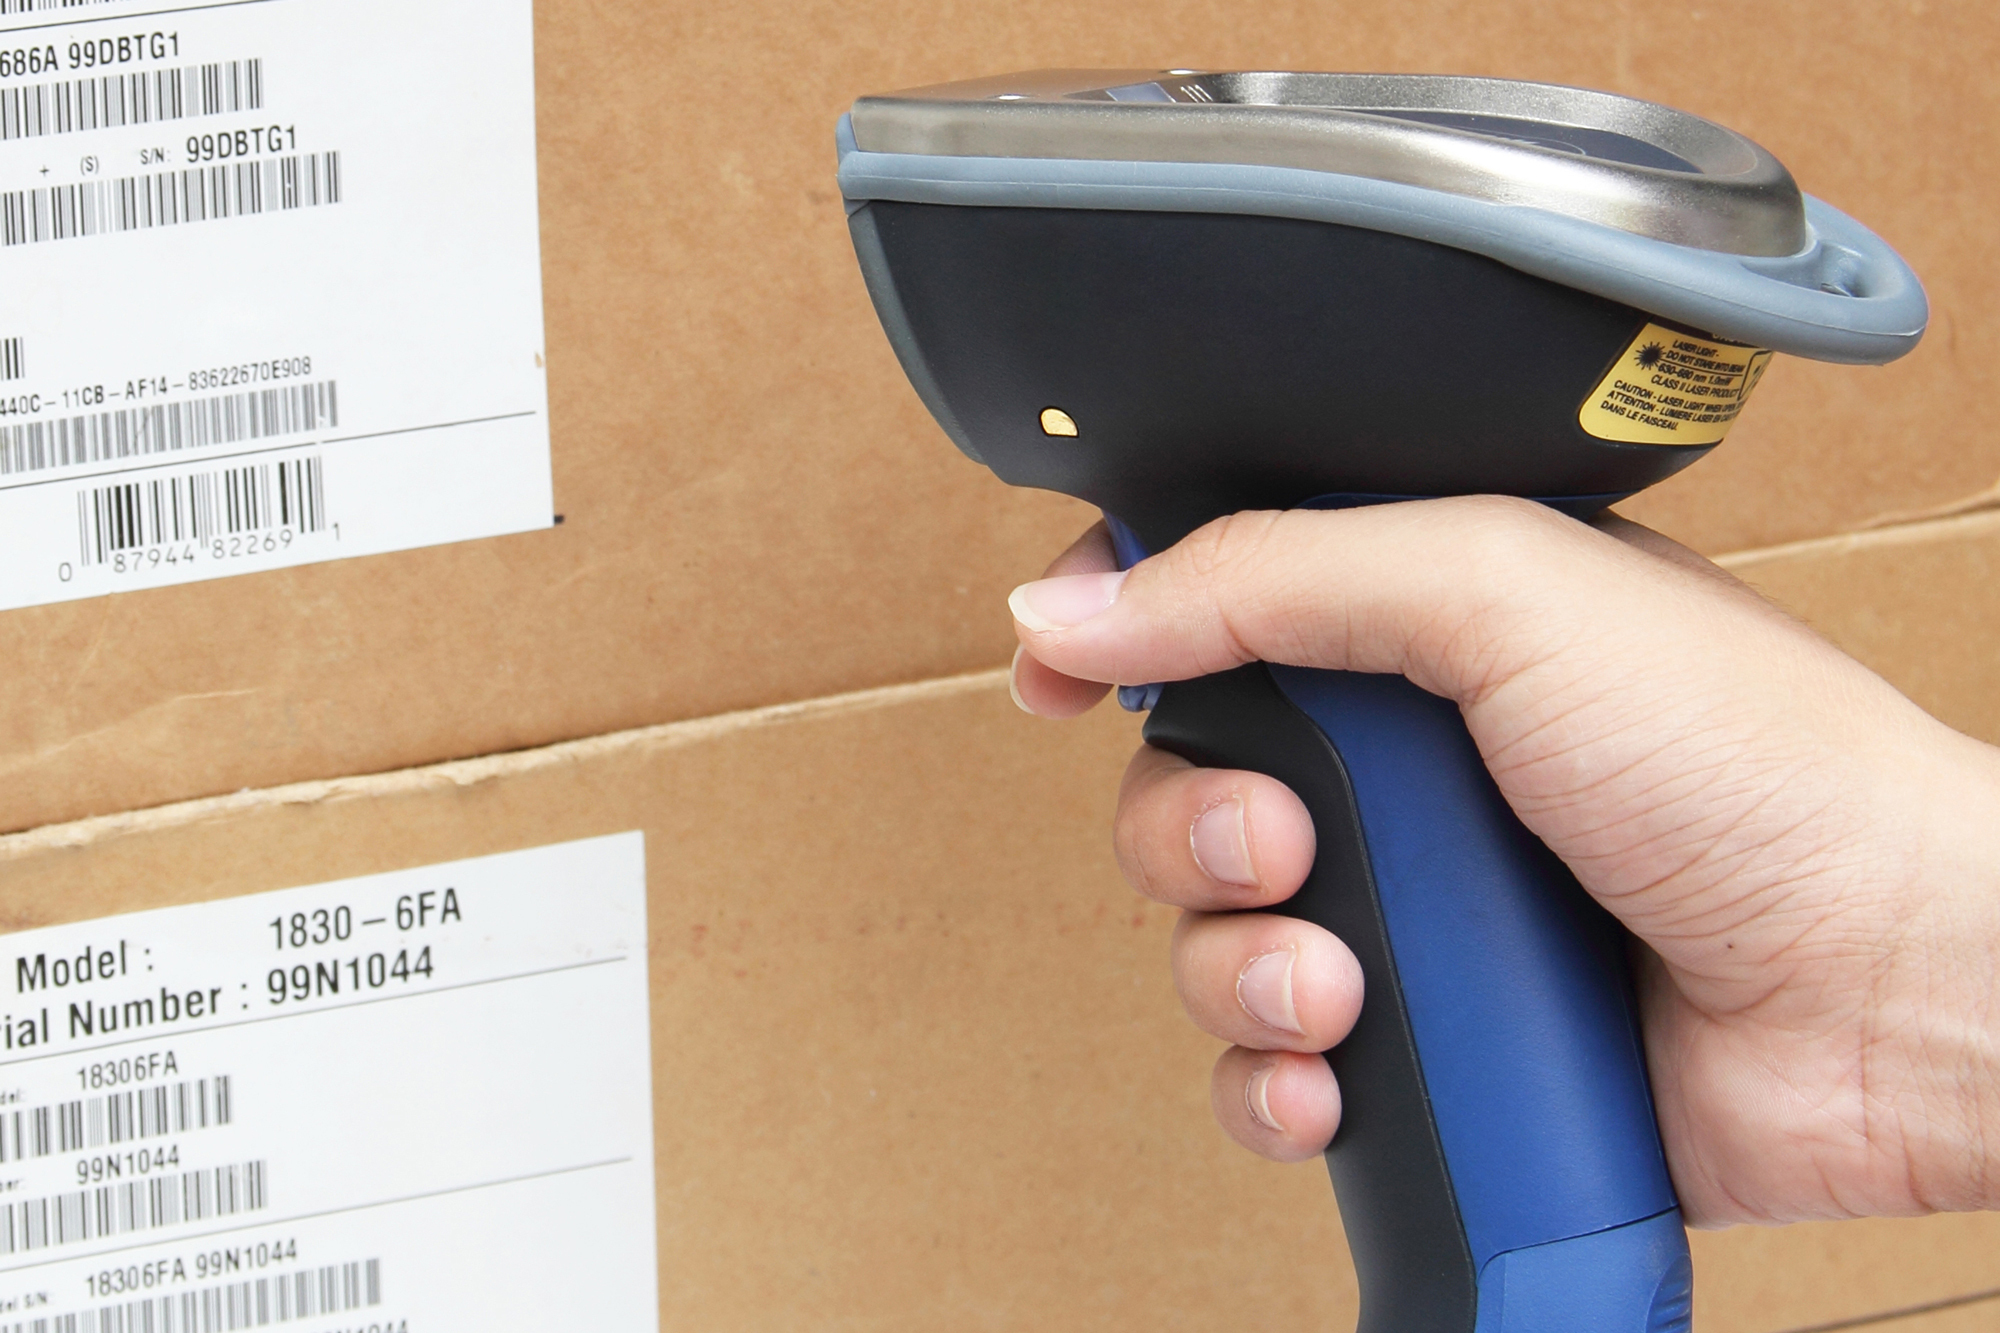 Order fulfilment process, man scanning packages